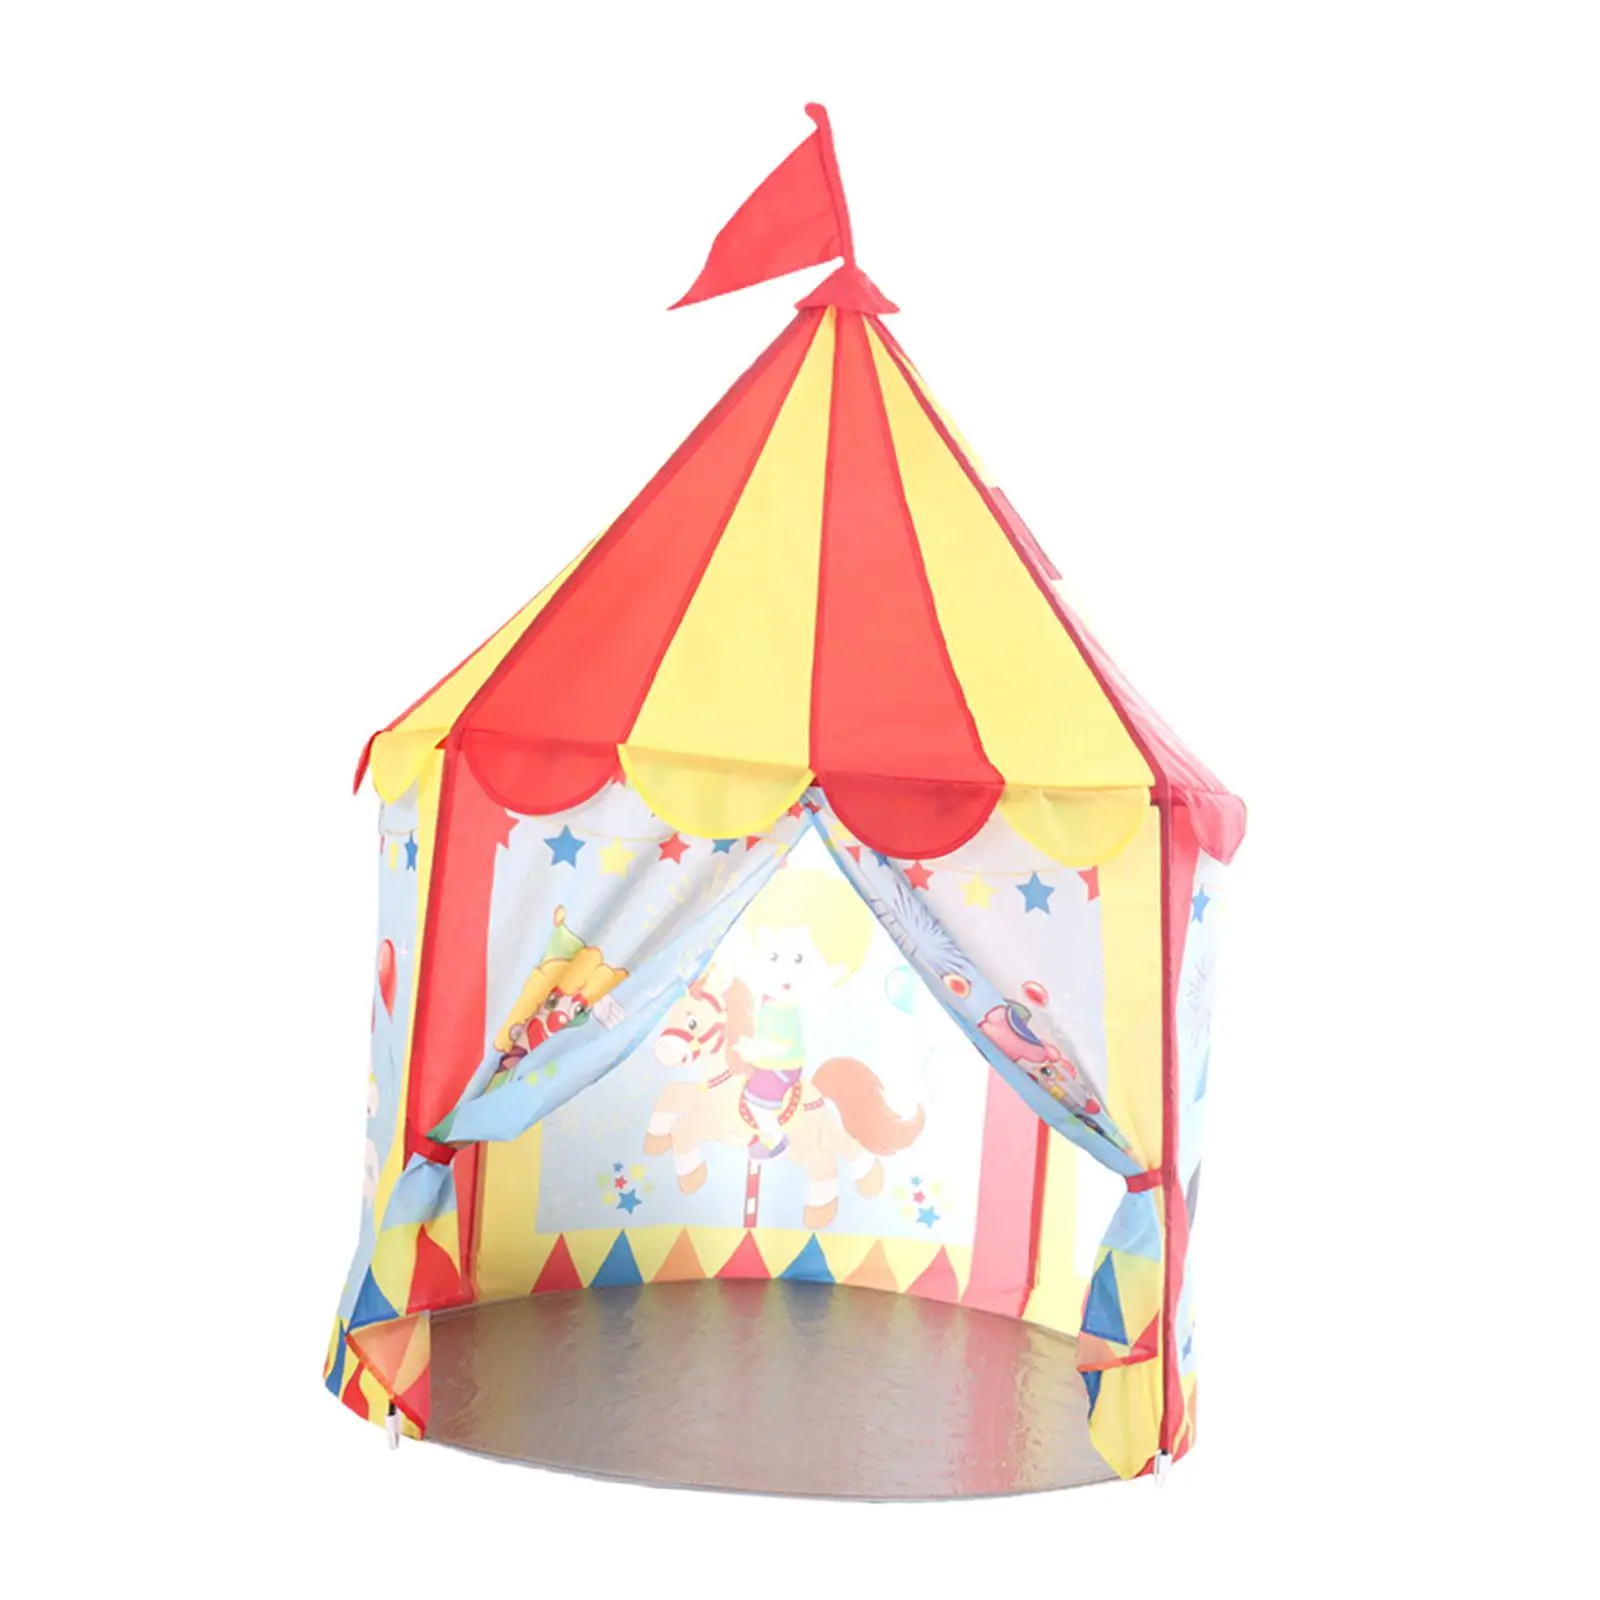 Children Castle Playhous, Princess Castle Playhouse Tent ,Play Tent Play Teepee for Yard